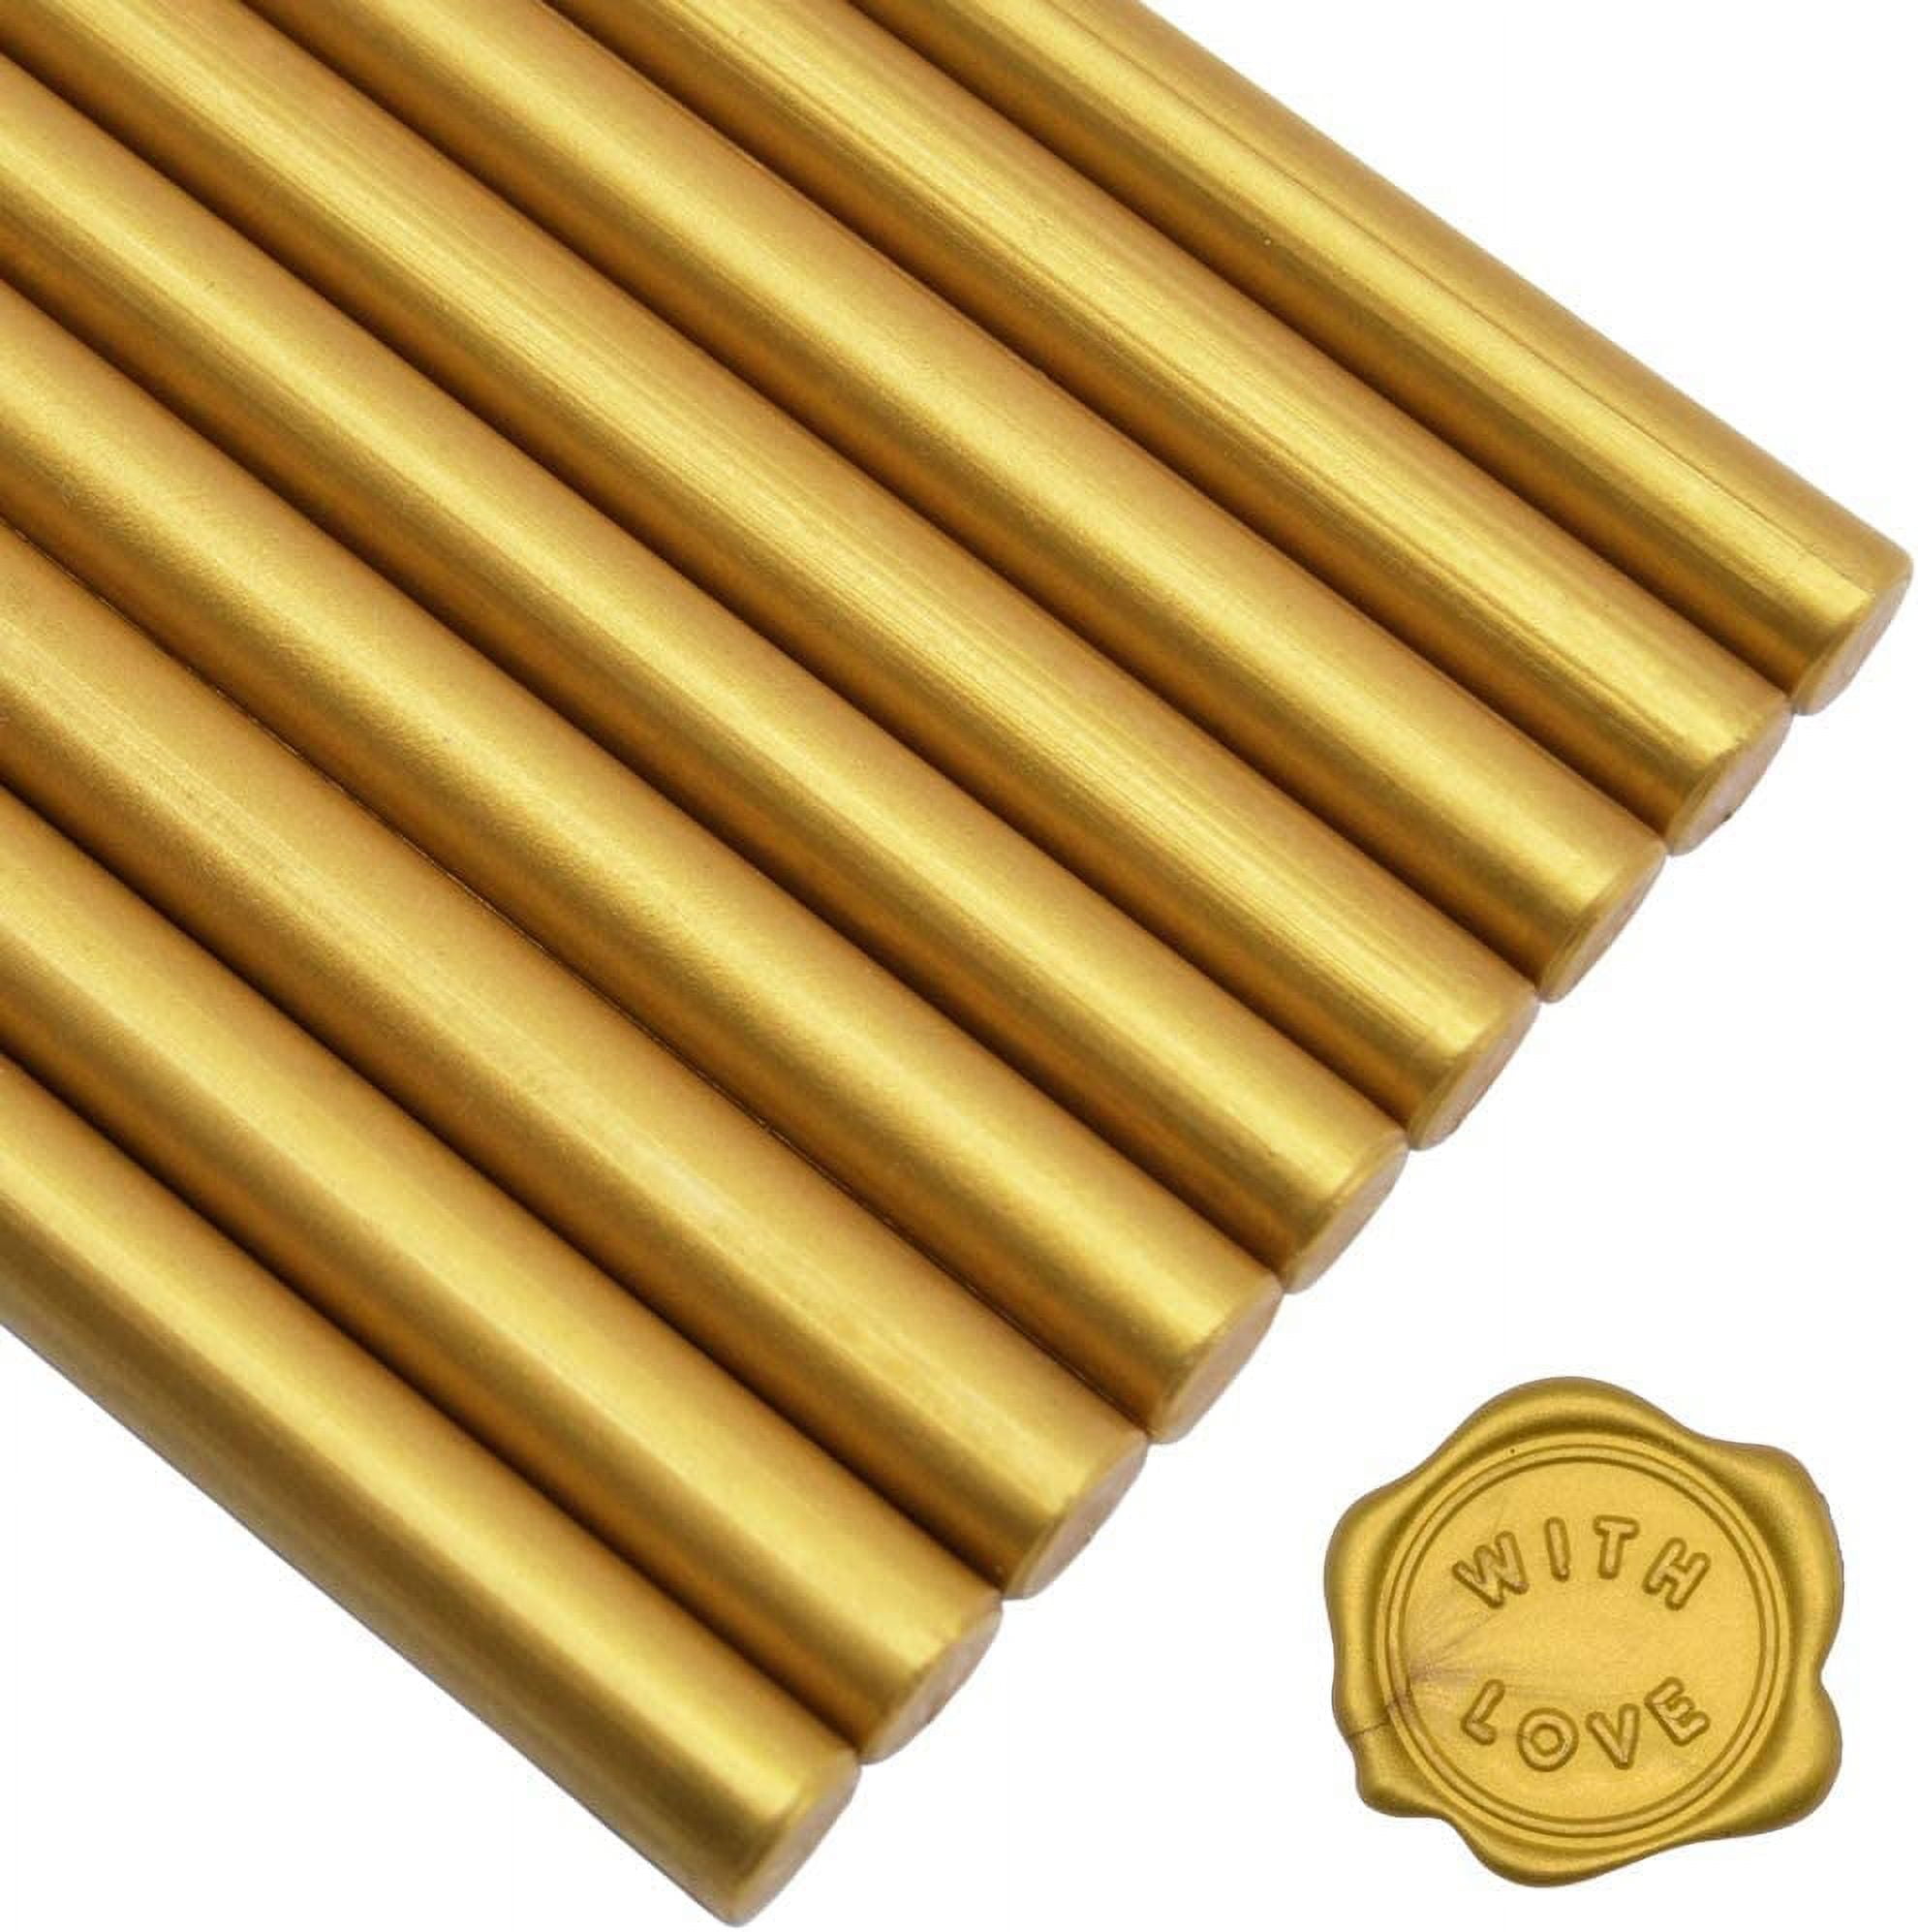 Gold Wax Seal Sticks, HOSAIL 20pcs Gold Wax Sealing Sticks Beads Great for  Wax Sealing Stamp, Can Be Used in Glue Gun, Wax Seal Warmer and Sealing Wax